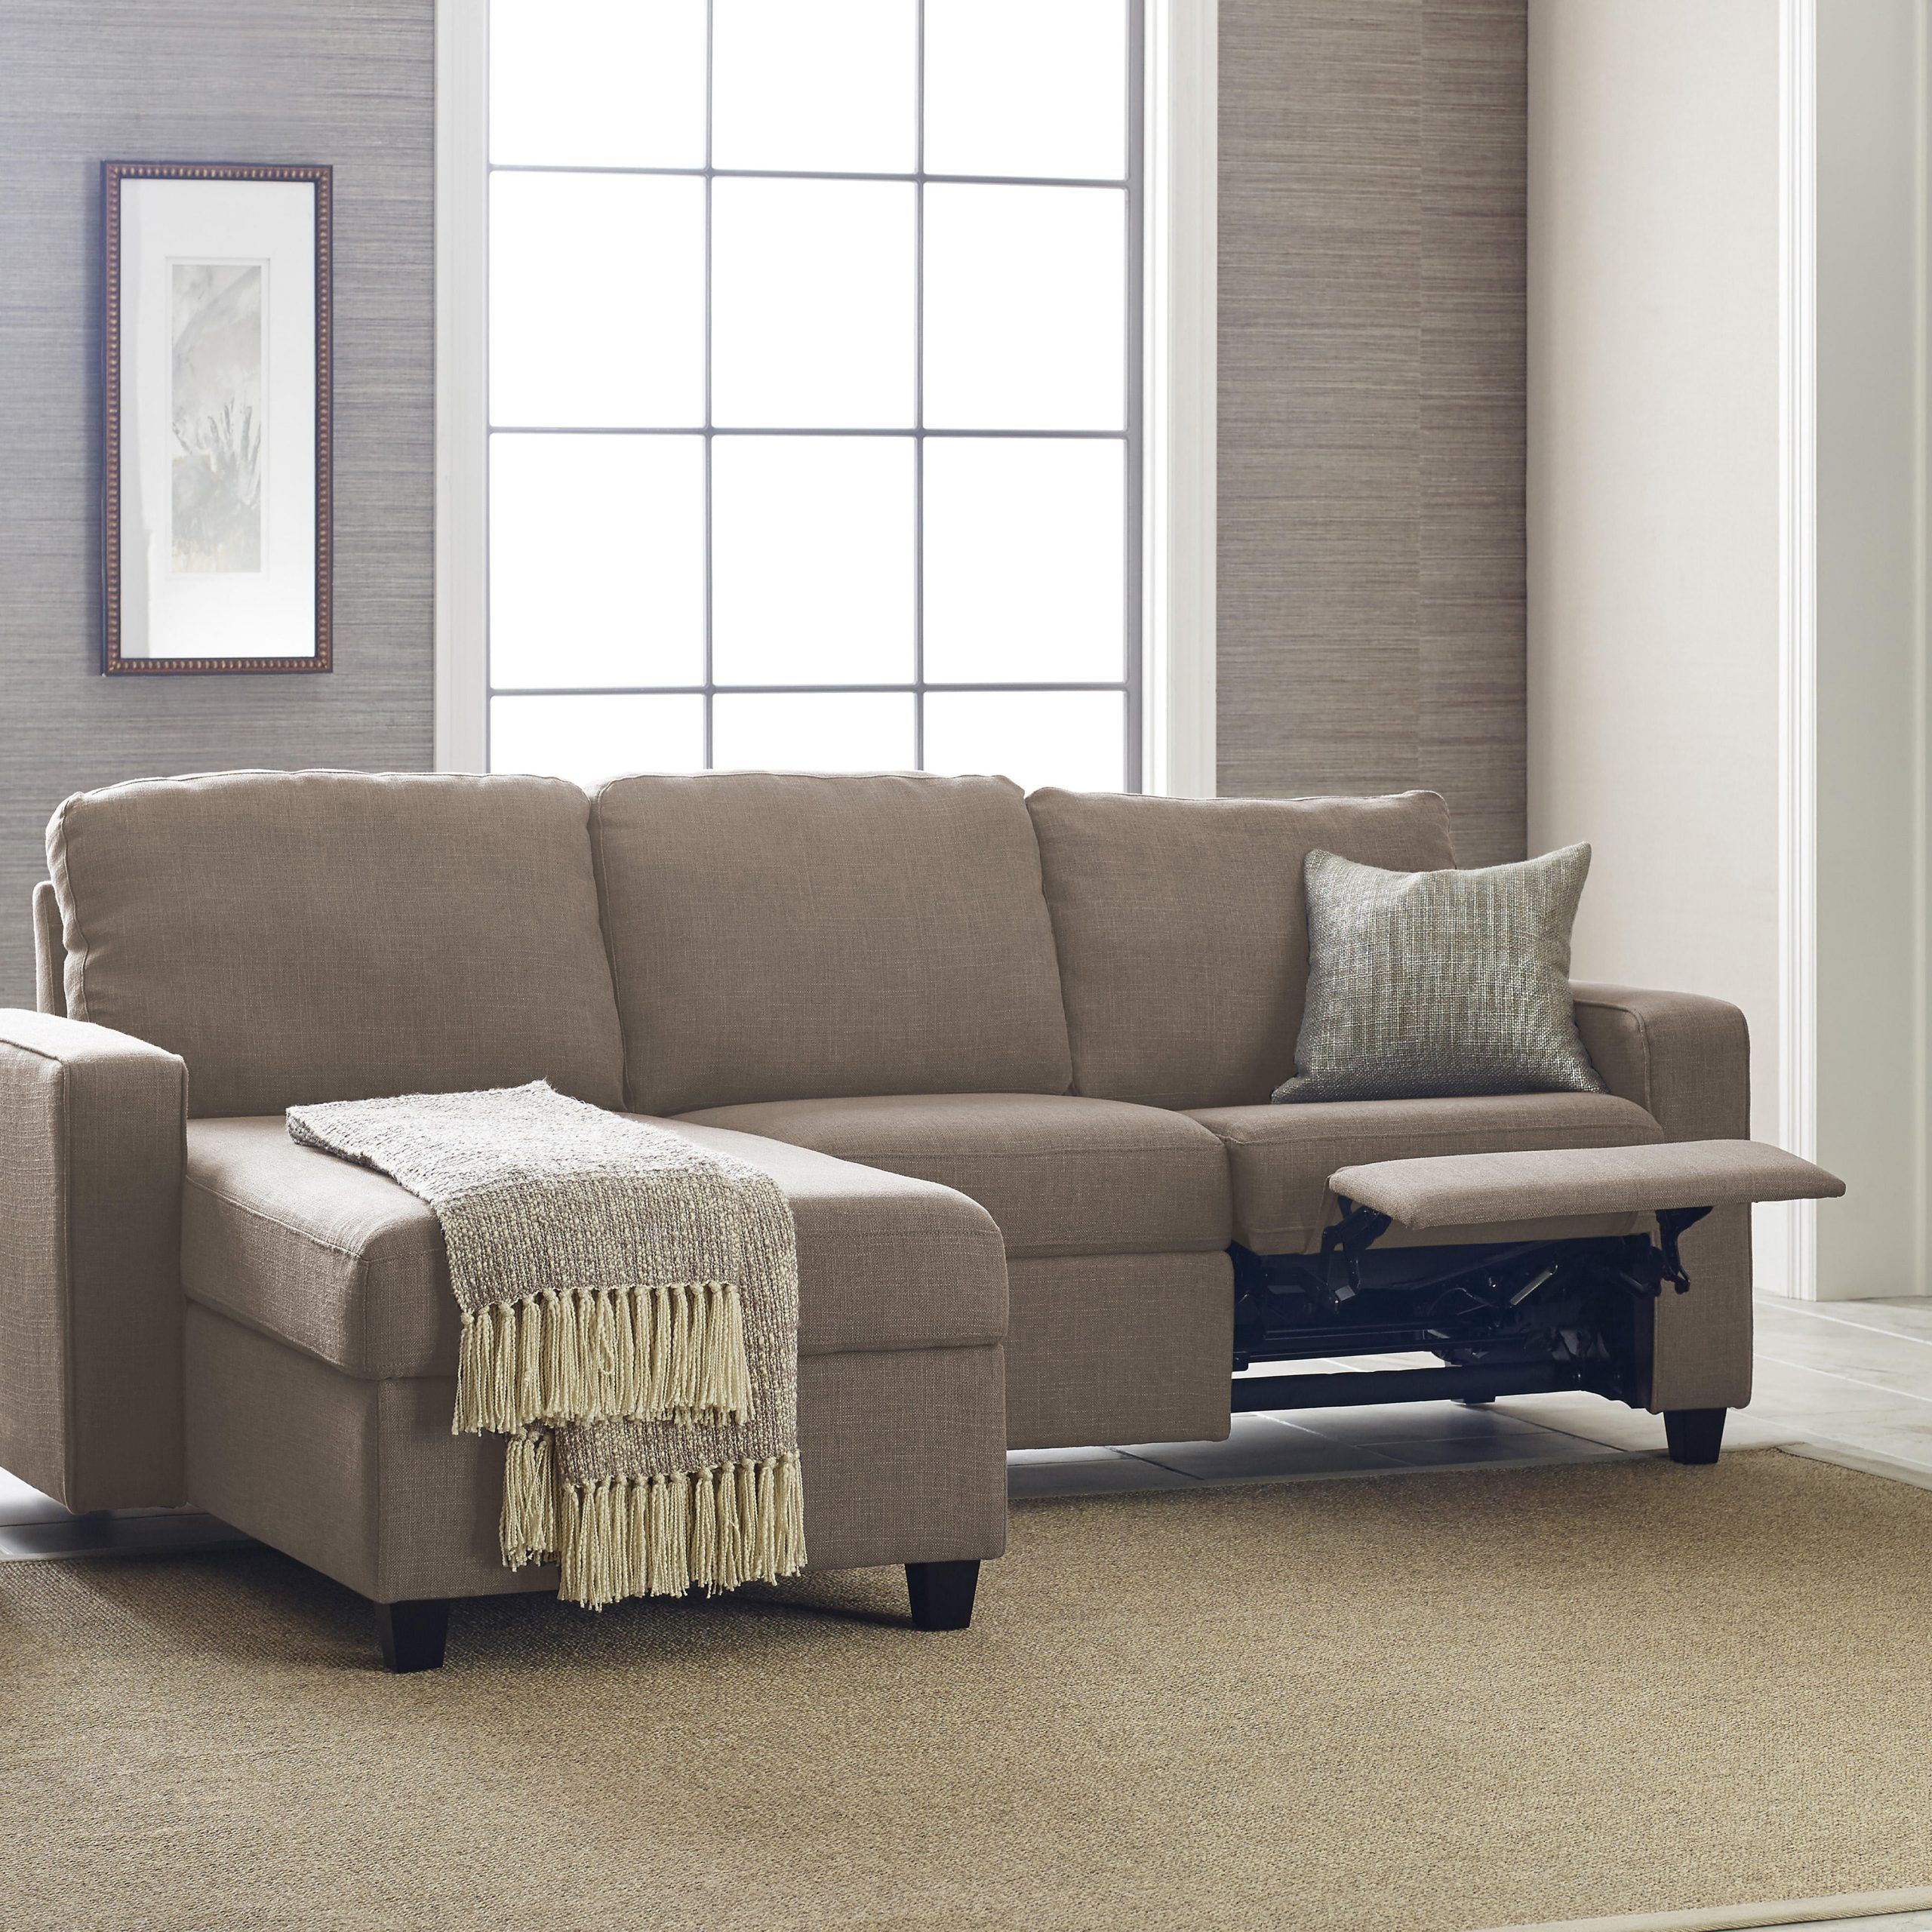 Serta Palisades Reclining Sectional With Right Storage Chaise – Beige Intended For Small L Shaped Sectional Sofas In Beige (View 17 of 20)